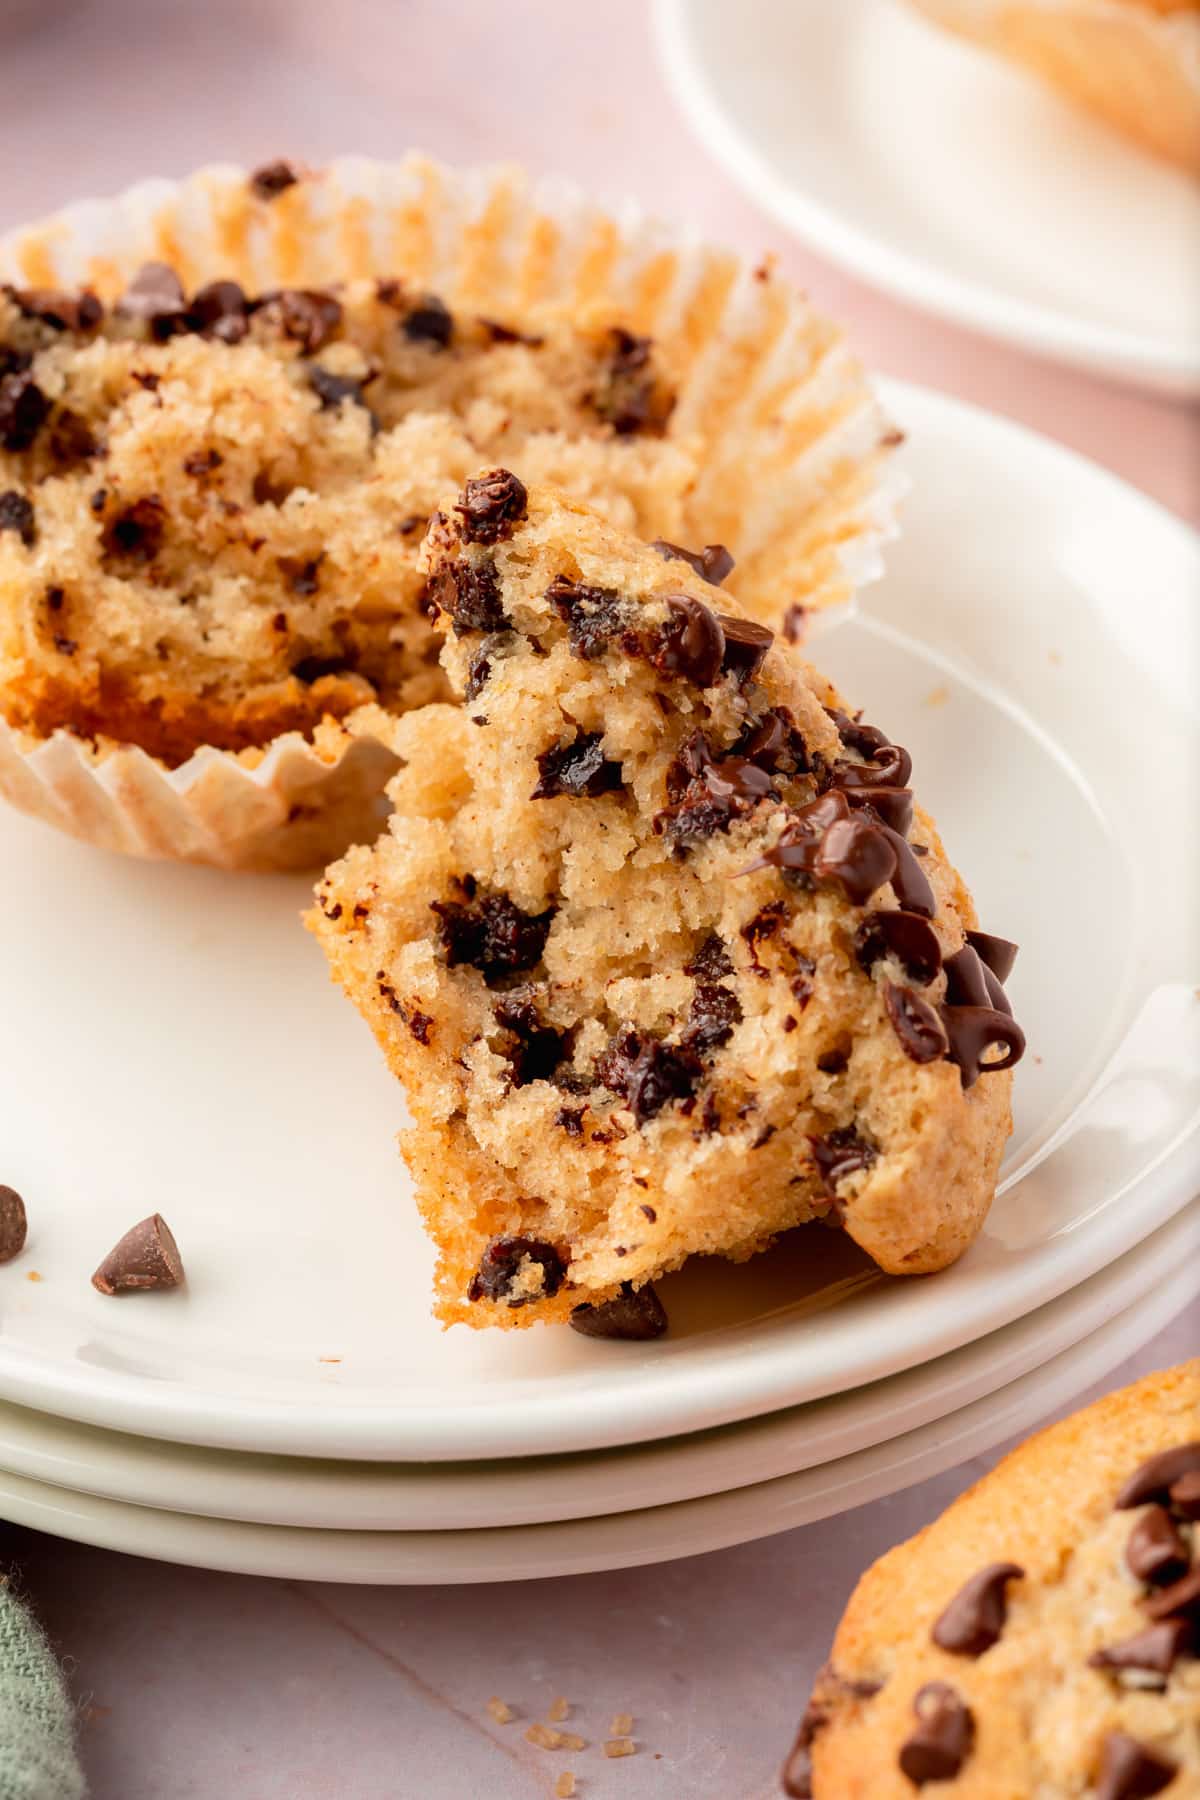 A close up of a gluten-free chocolate chip muffin that has been broken in half to show the fluffy inside on a stack of dessert plates.